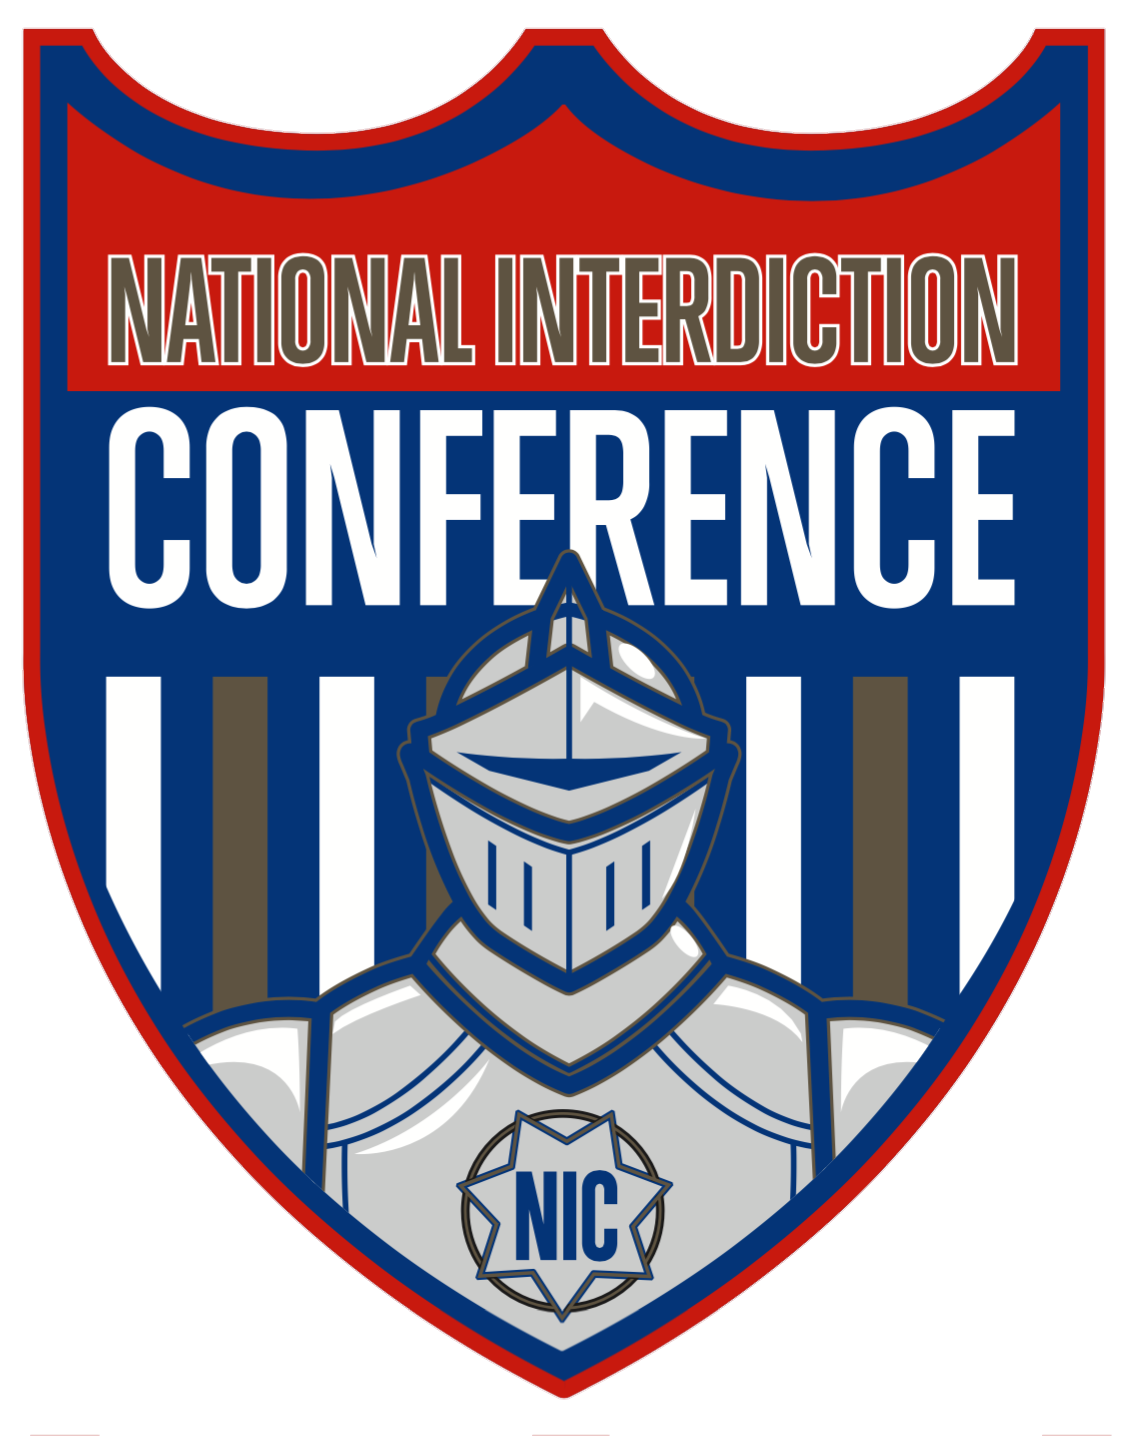 National Interdiction Conference